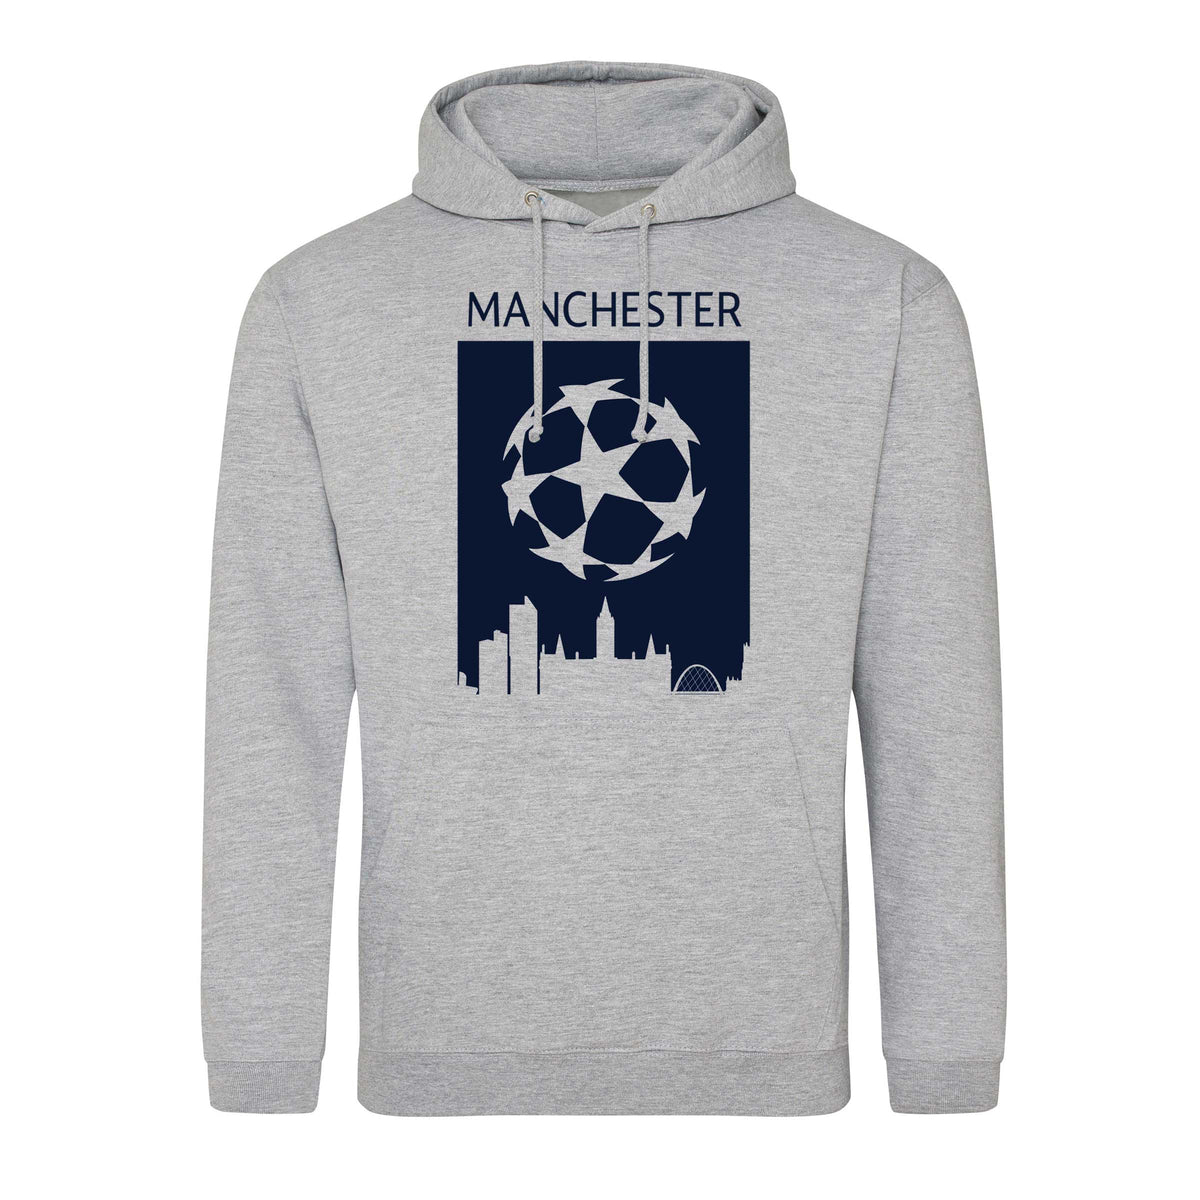 Champions League Manchester City Skyline Hoodie Grey